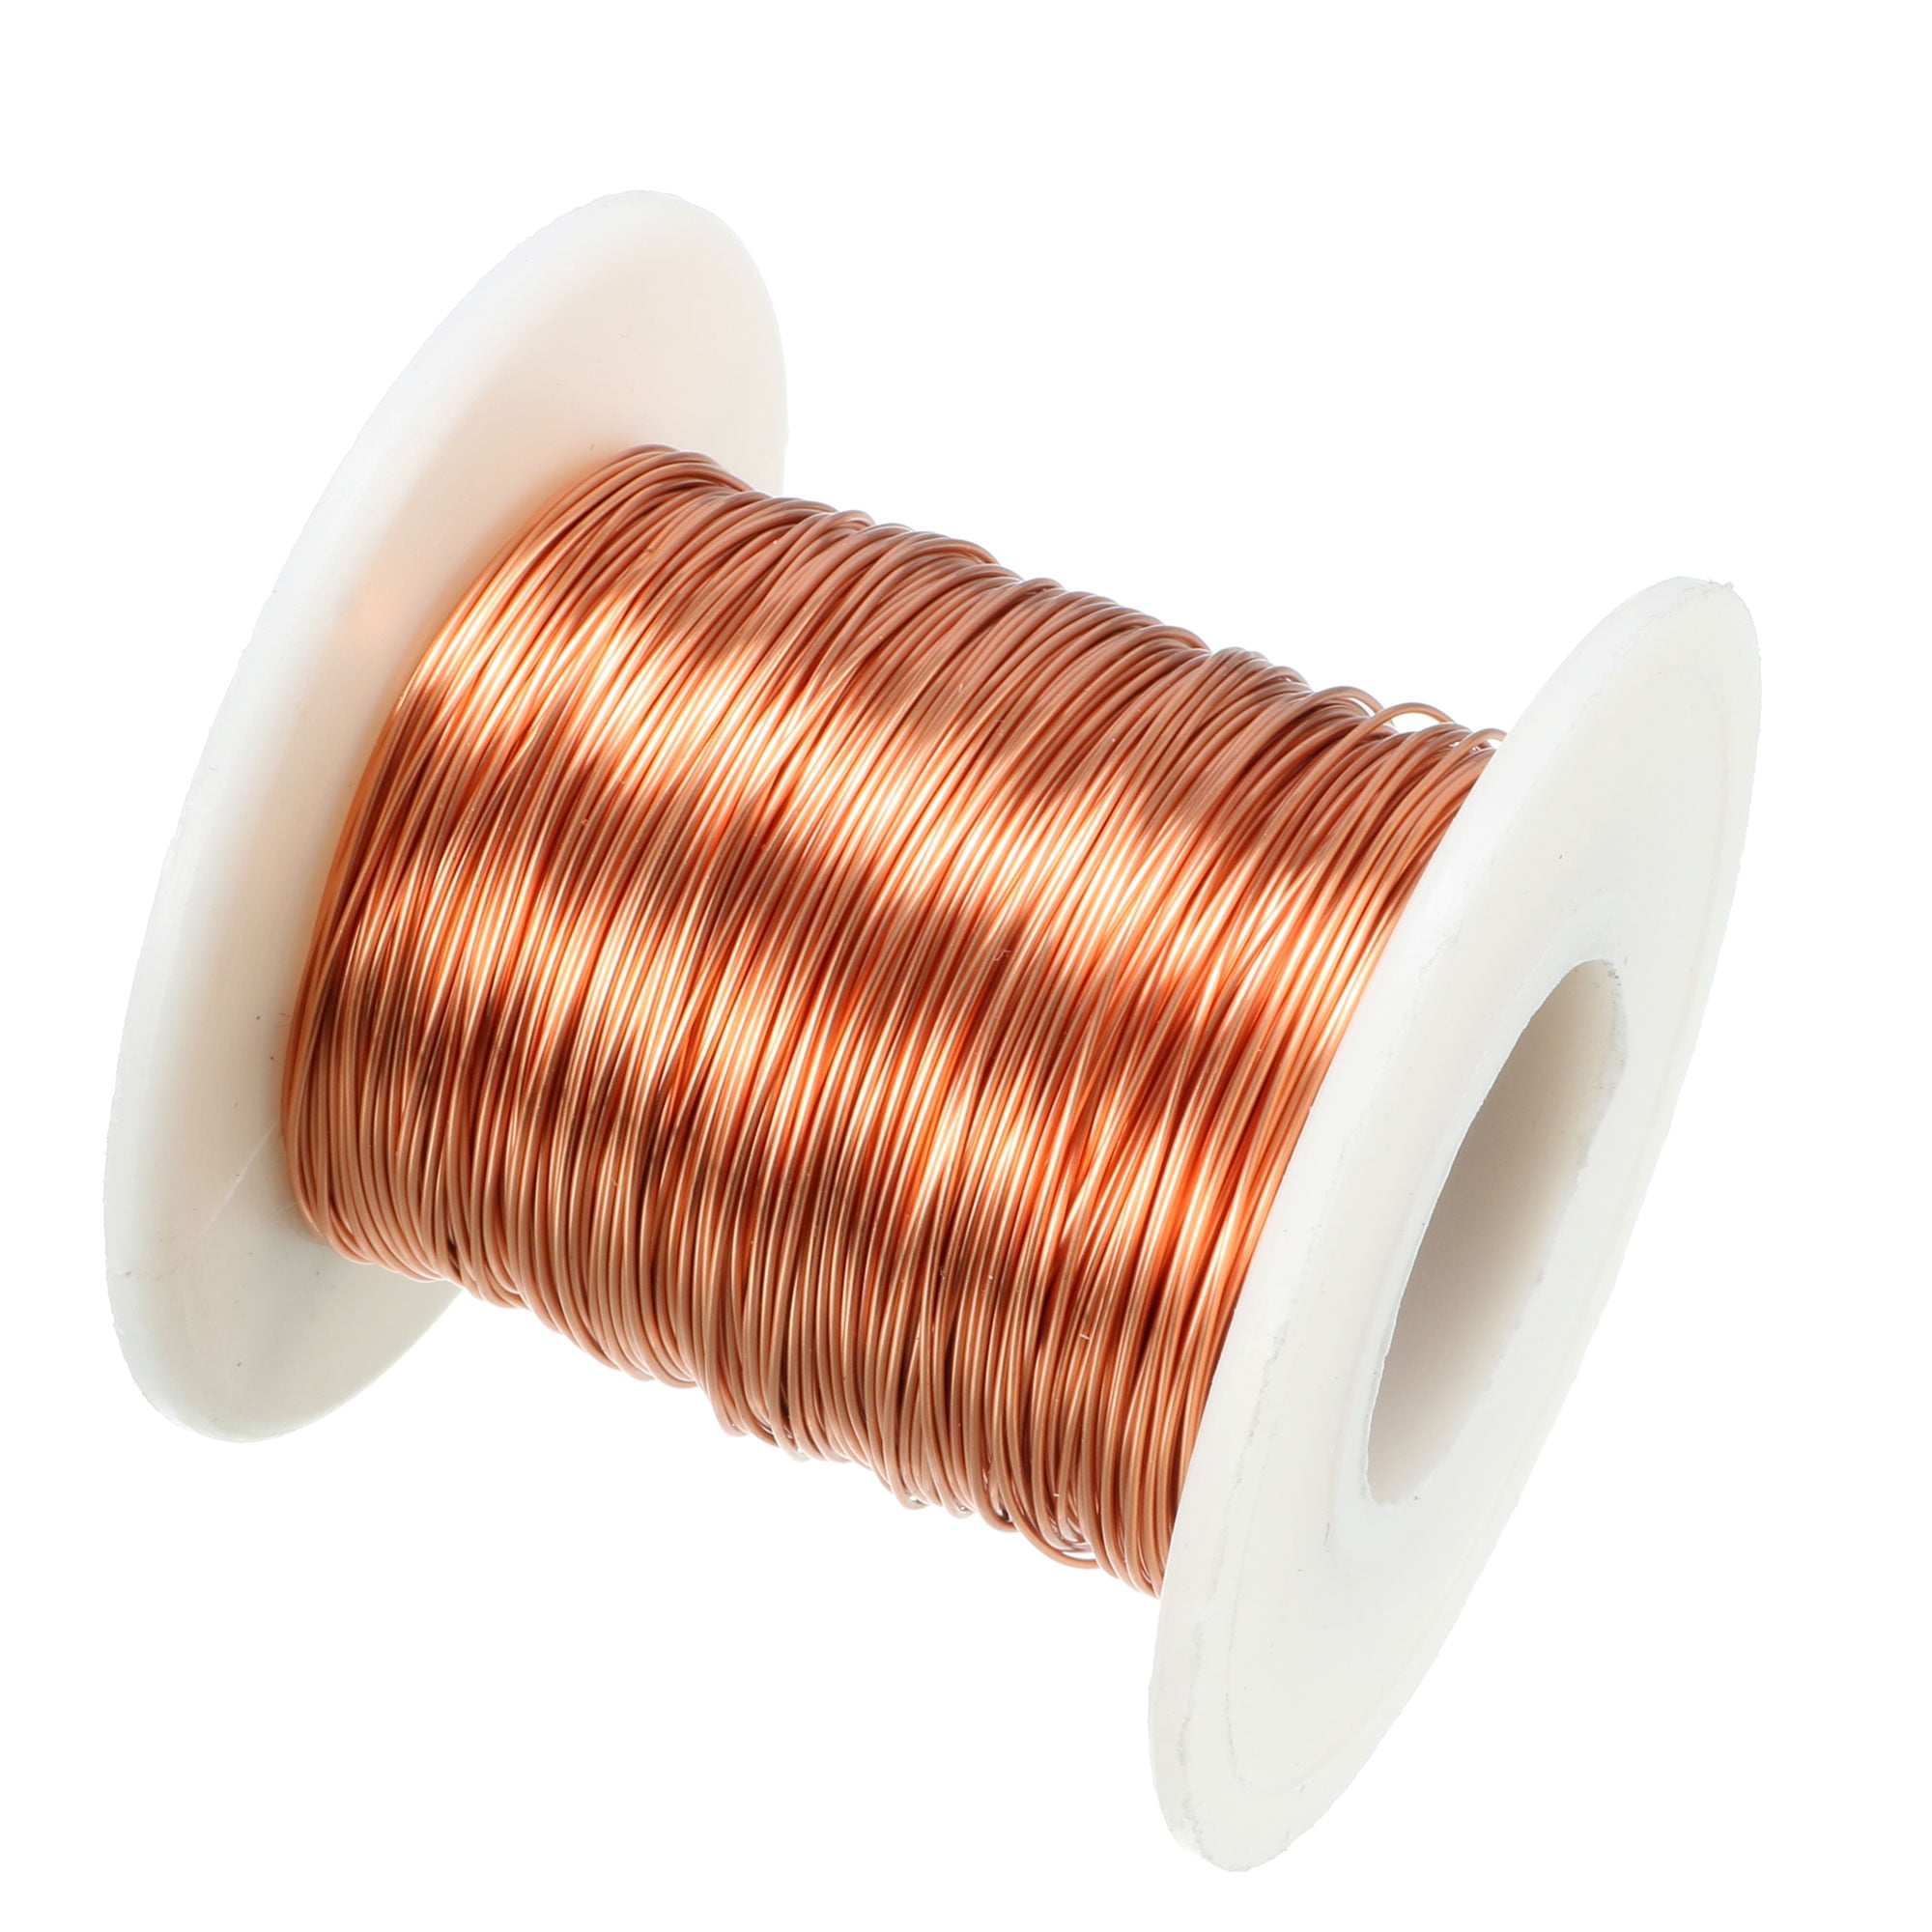 16 AWG Gauge Enameled Copper Magnet Wire 5.0 lbs 631' Length 0.0520" 155C Red 